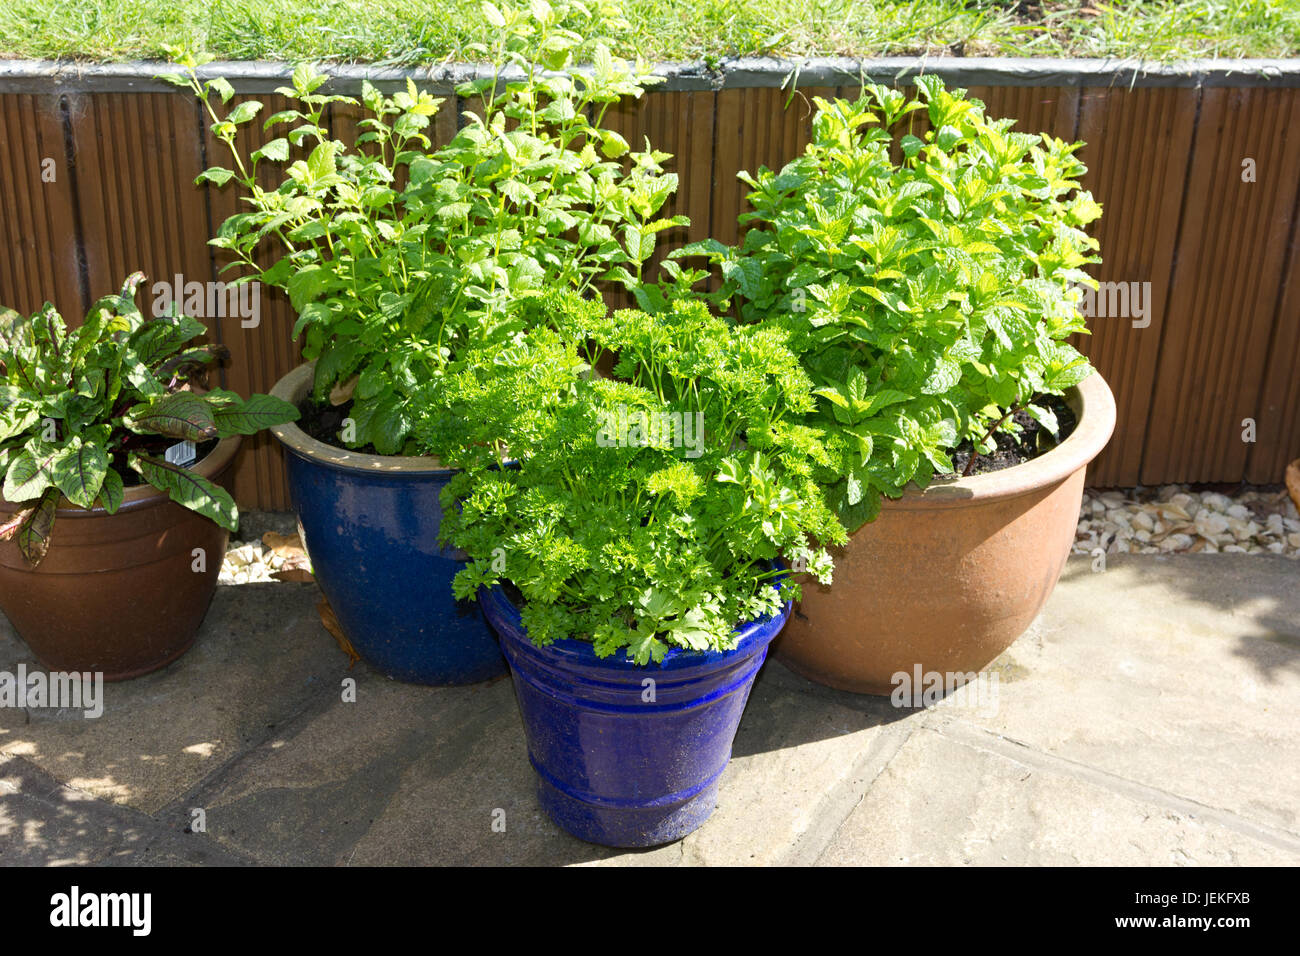 Pots of herbs on a patio Stock Photo